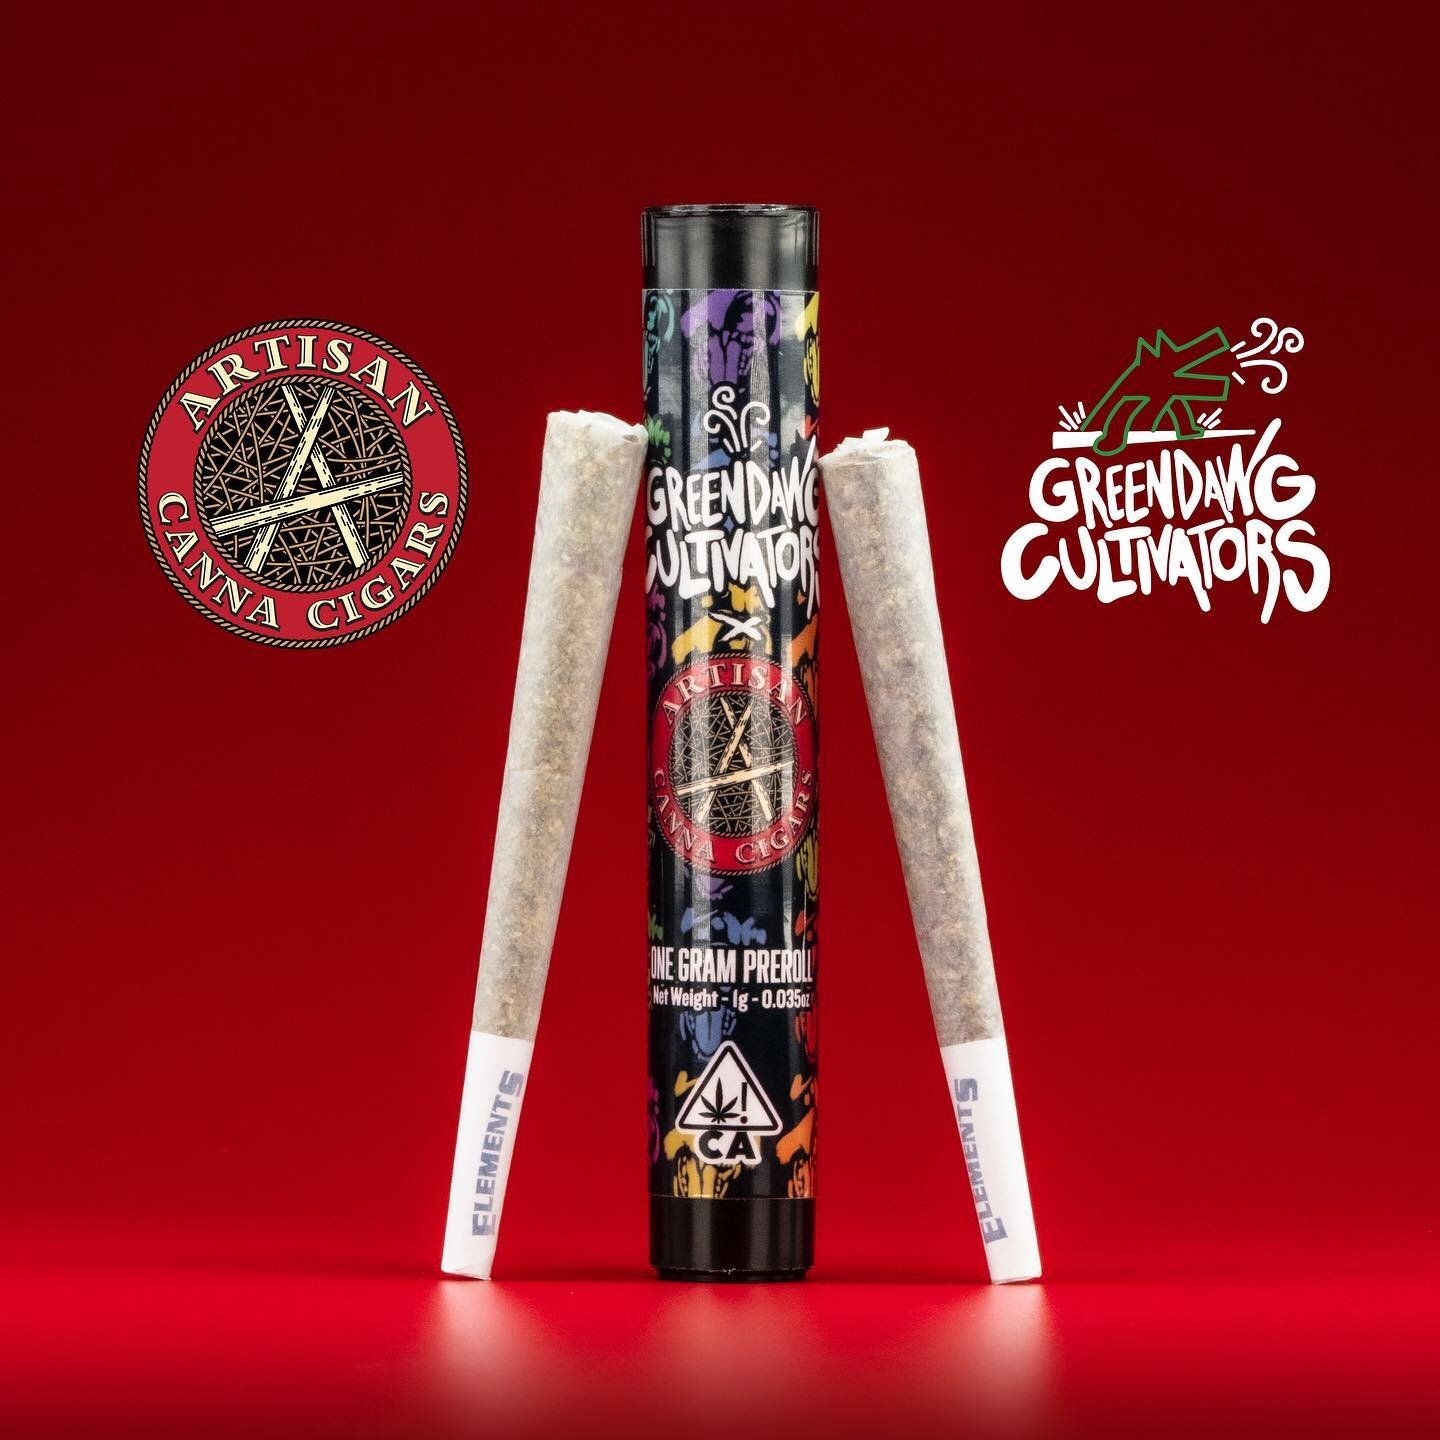 One of our dopest collaborators! @greendawgca with the 1G 🔥 Pre-Roll. It gets no better than this!